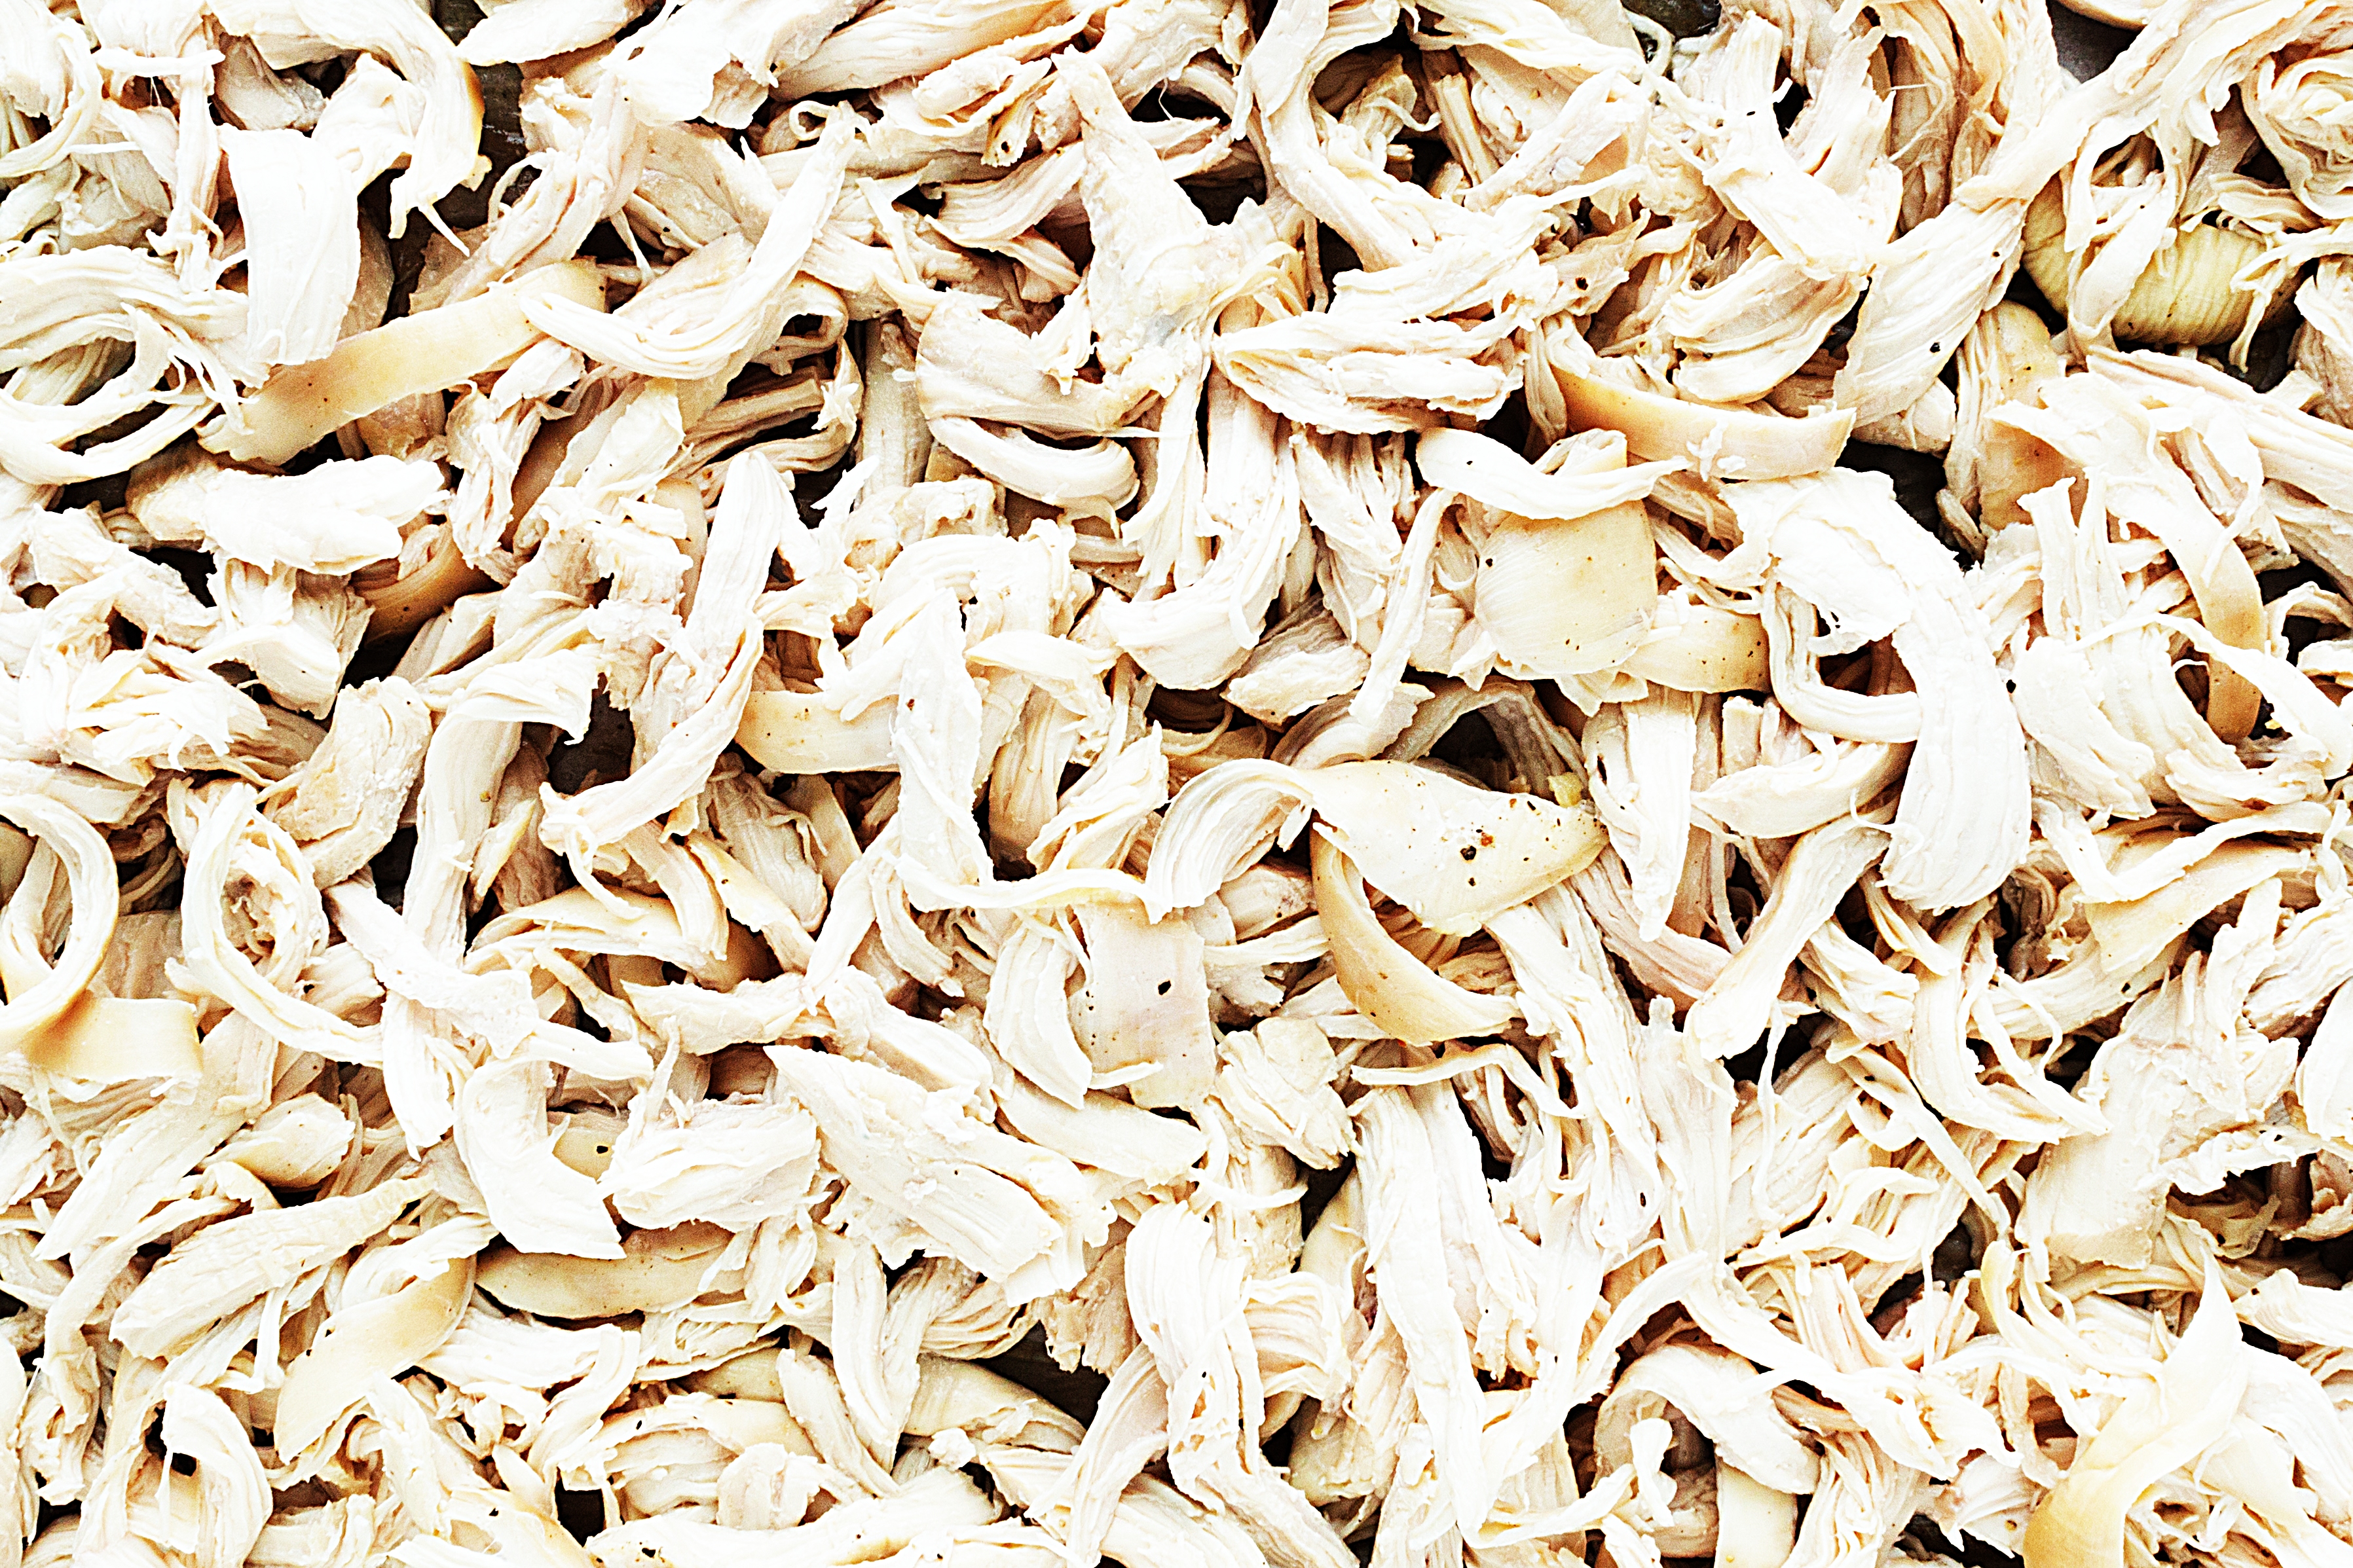 Stupid-Easy Recipe for Easy Shredded Chicken Breast Hack (#1 Top-Rated)